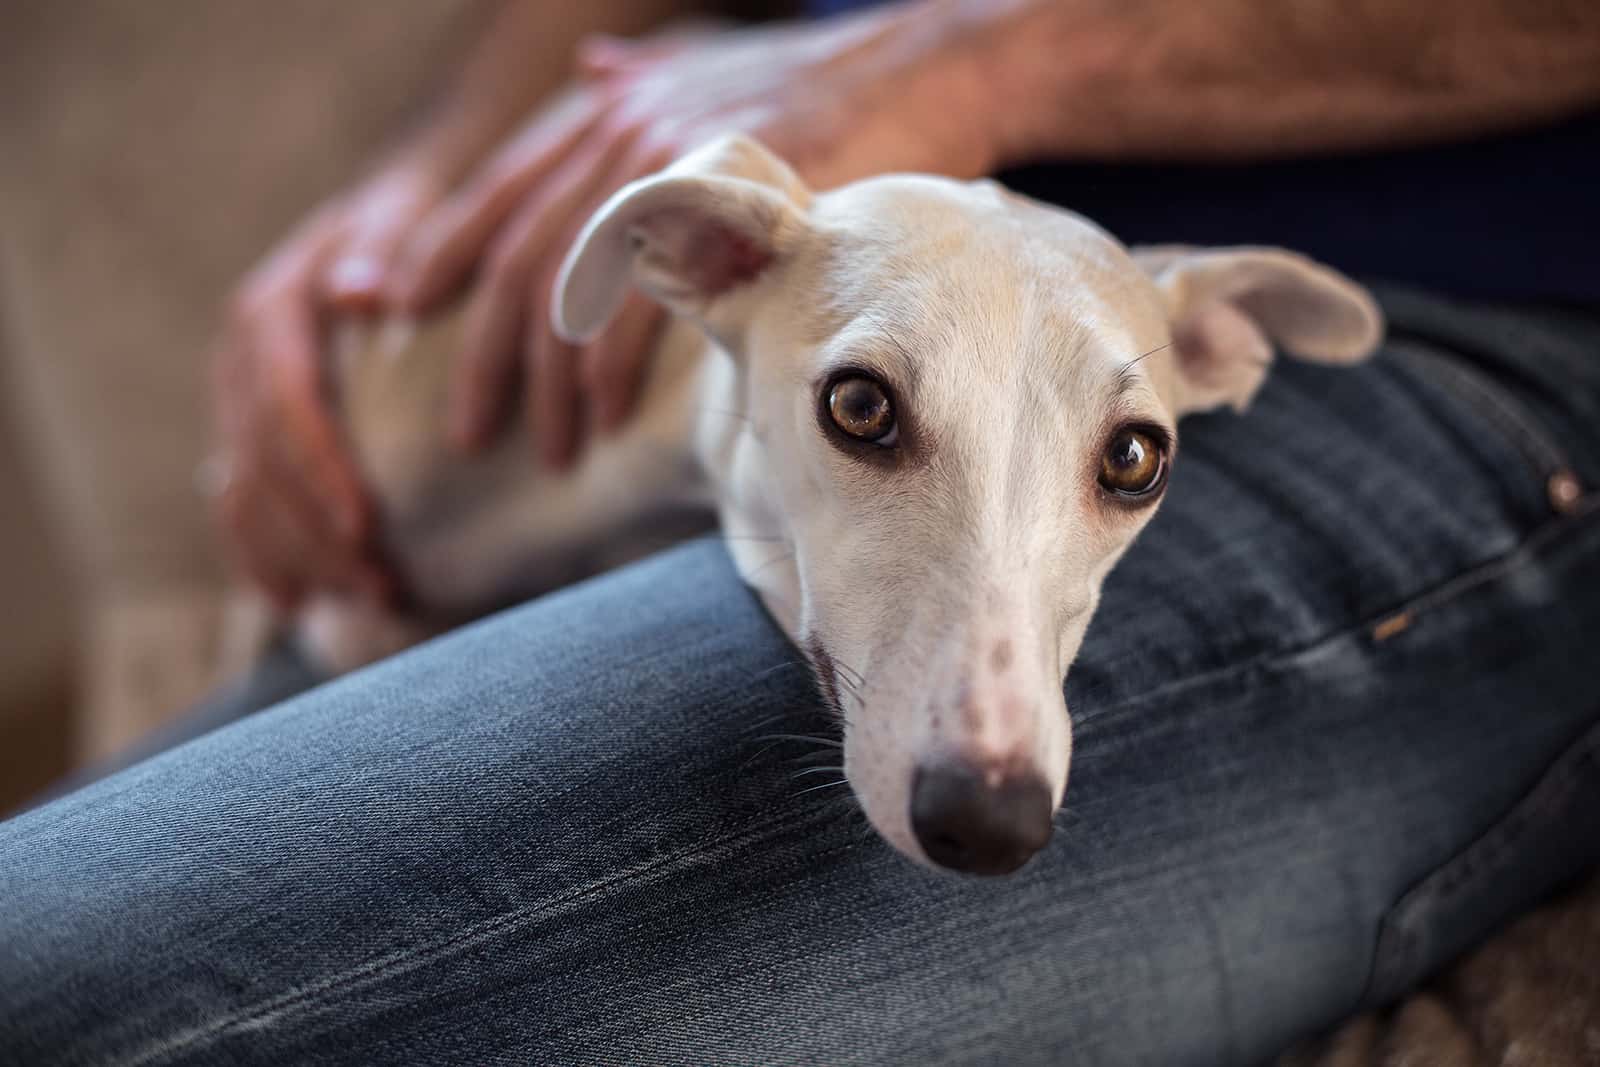 The whippet dog lies on the lap of the owner